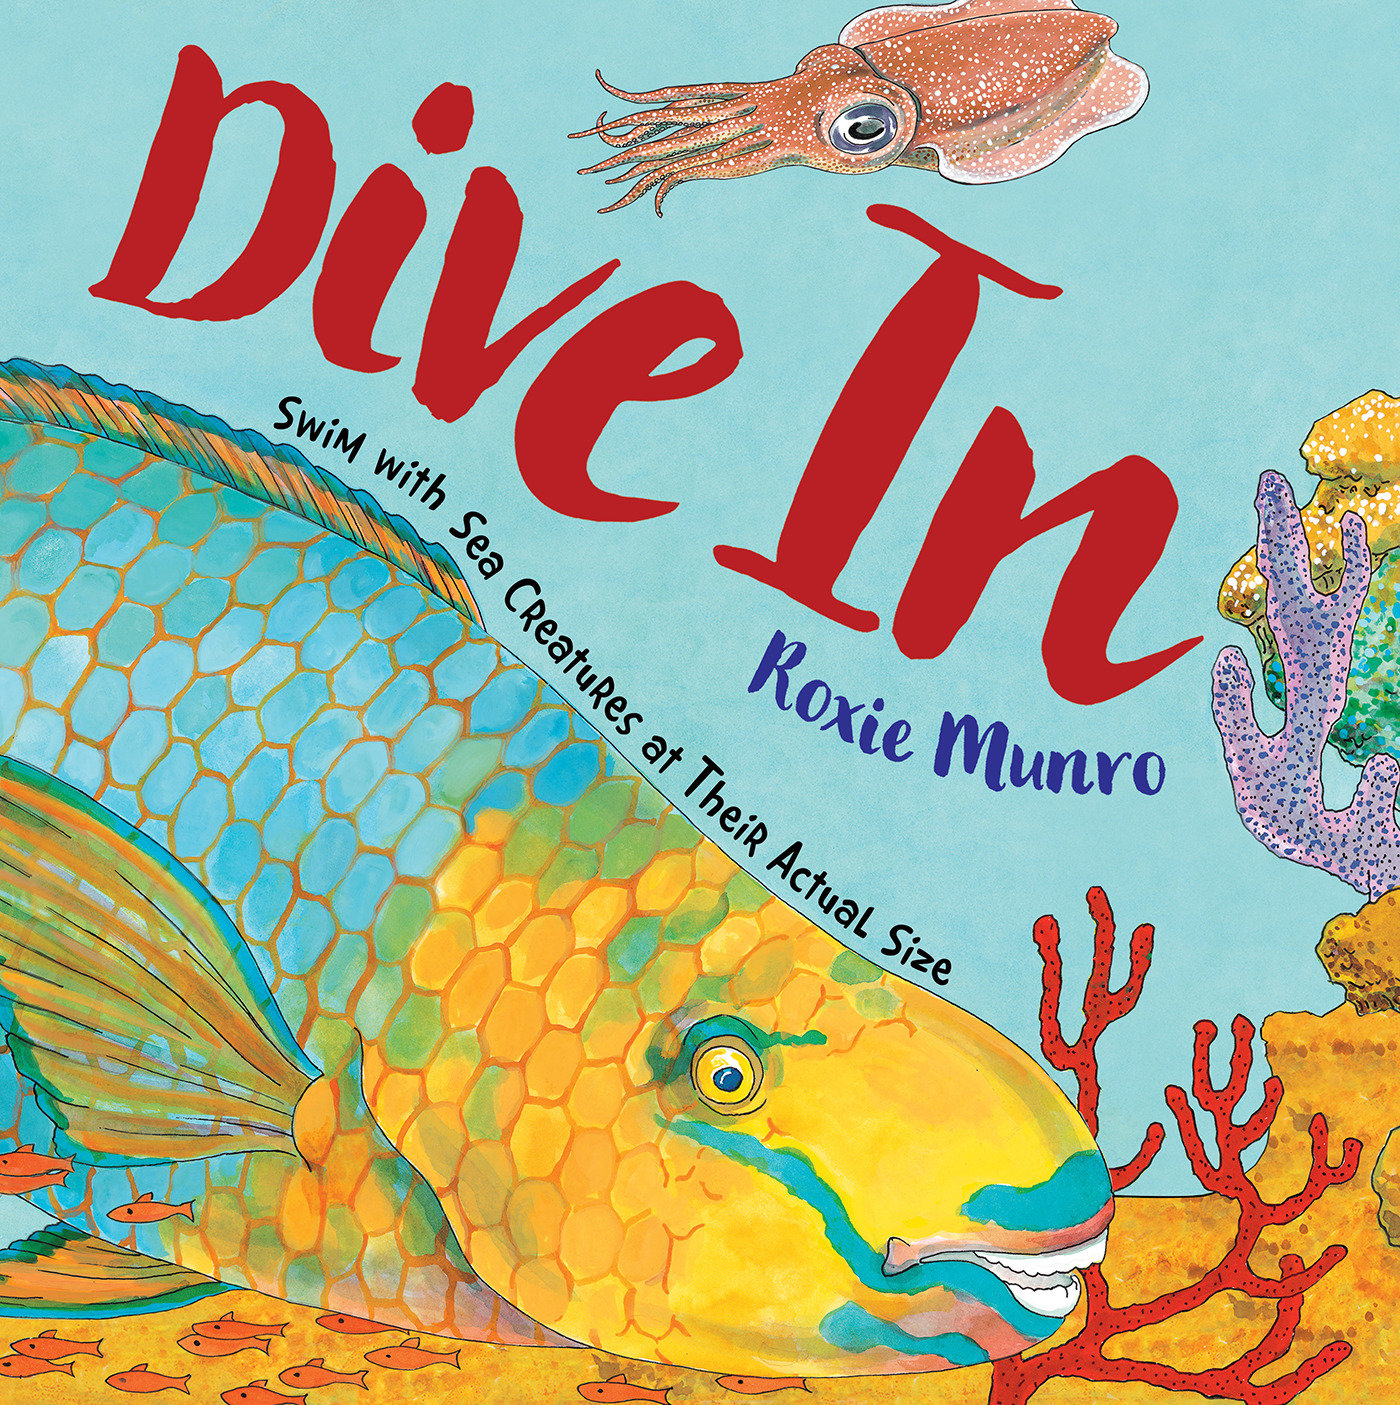 Dive In (Hardcover Book)